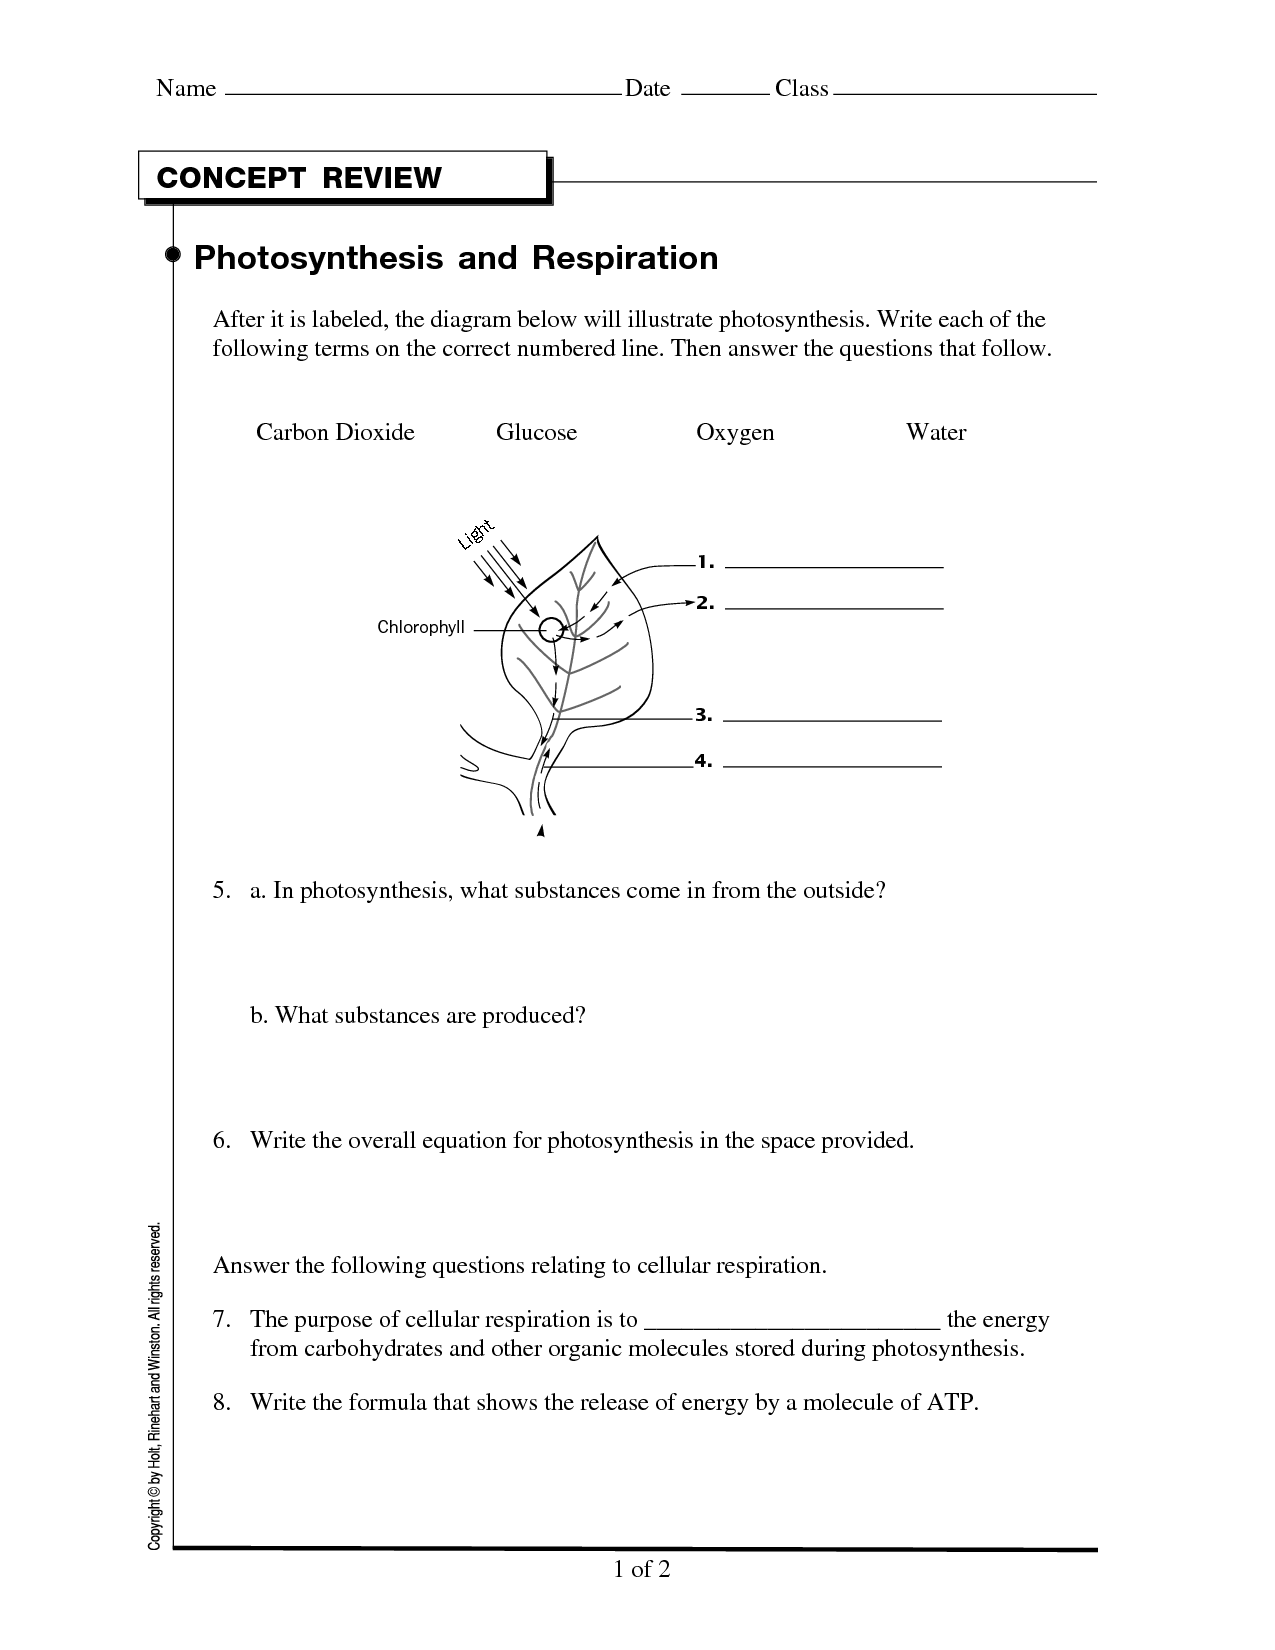 15 Best Images Of Photosynthesis Lab Worksheet Photosynthesis Cellular Respiration Worksheet 